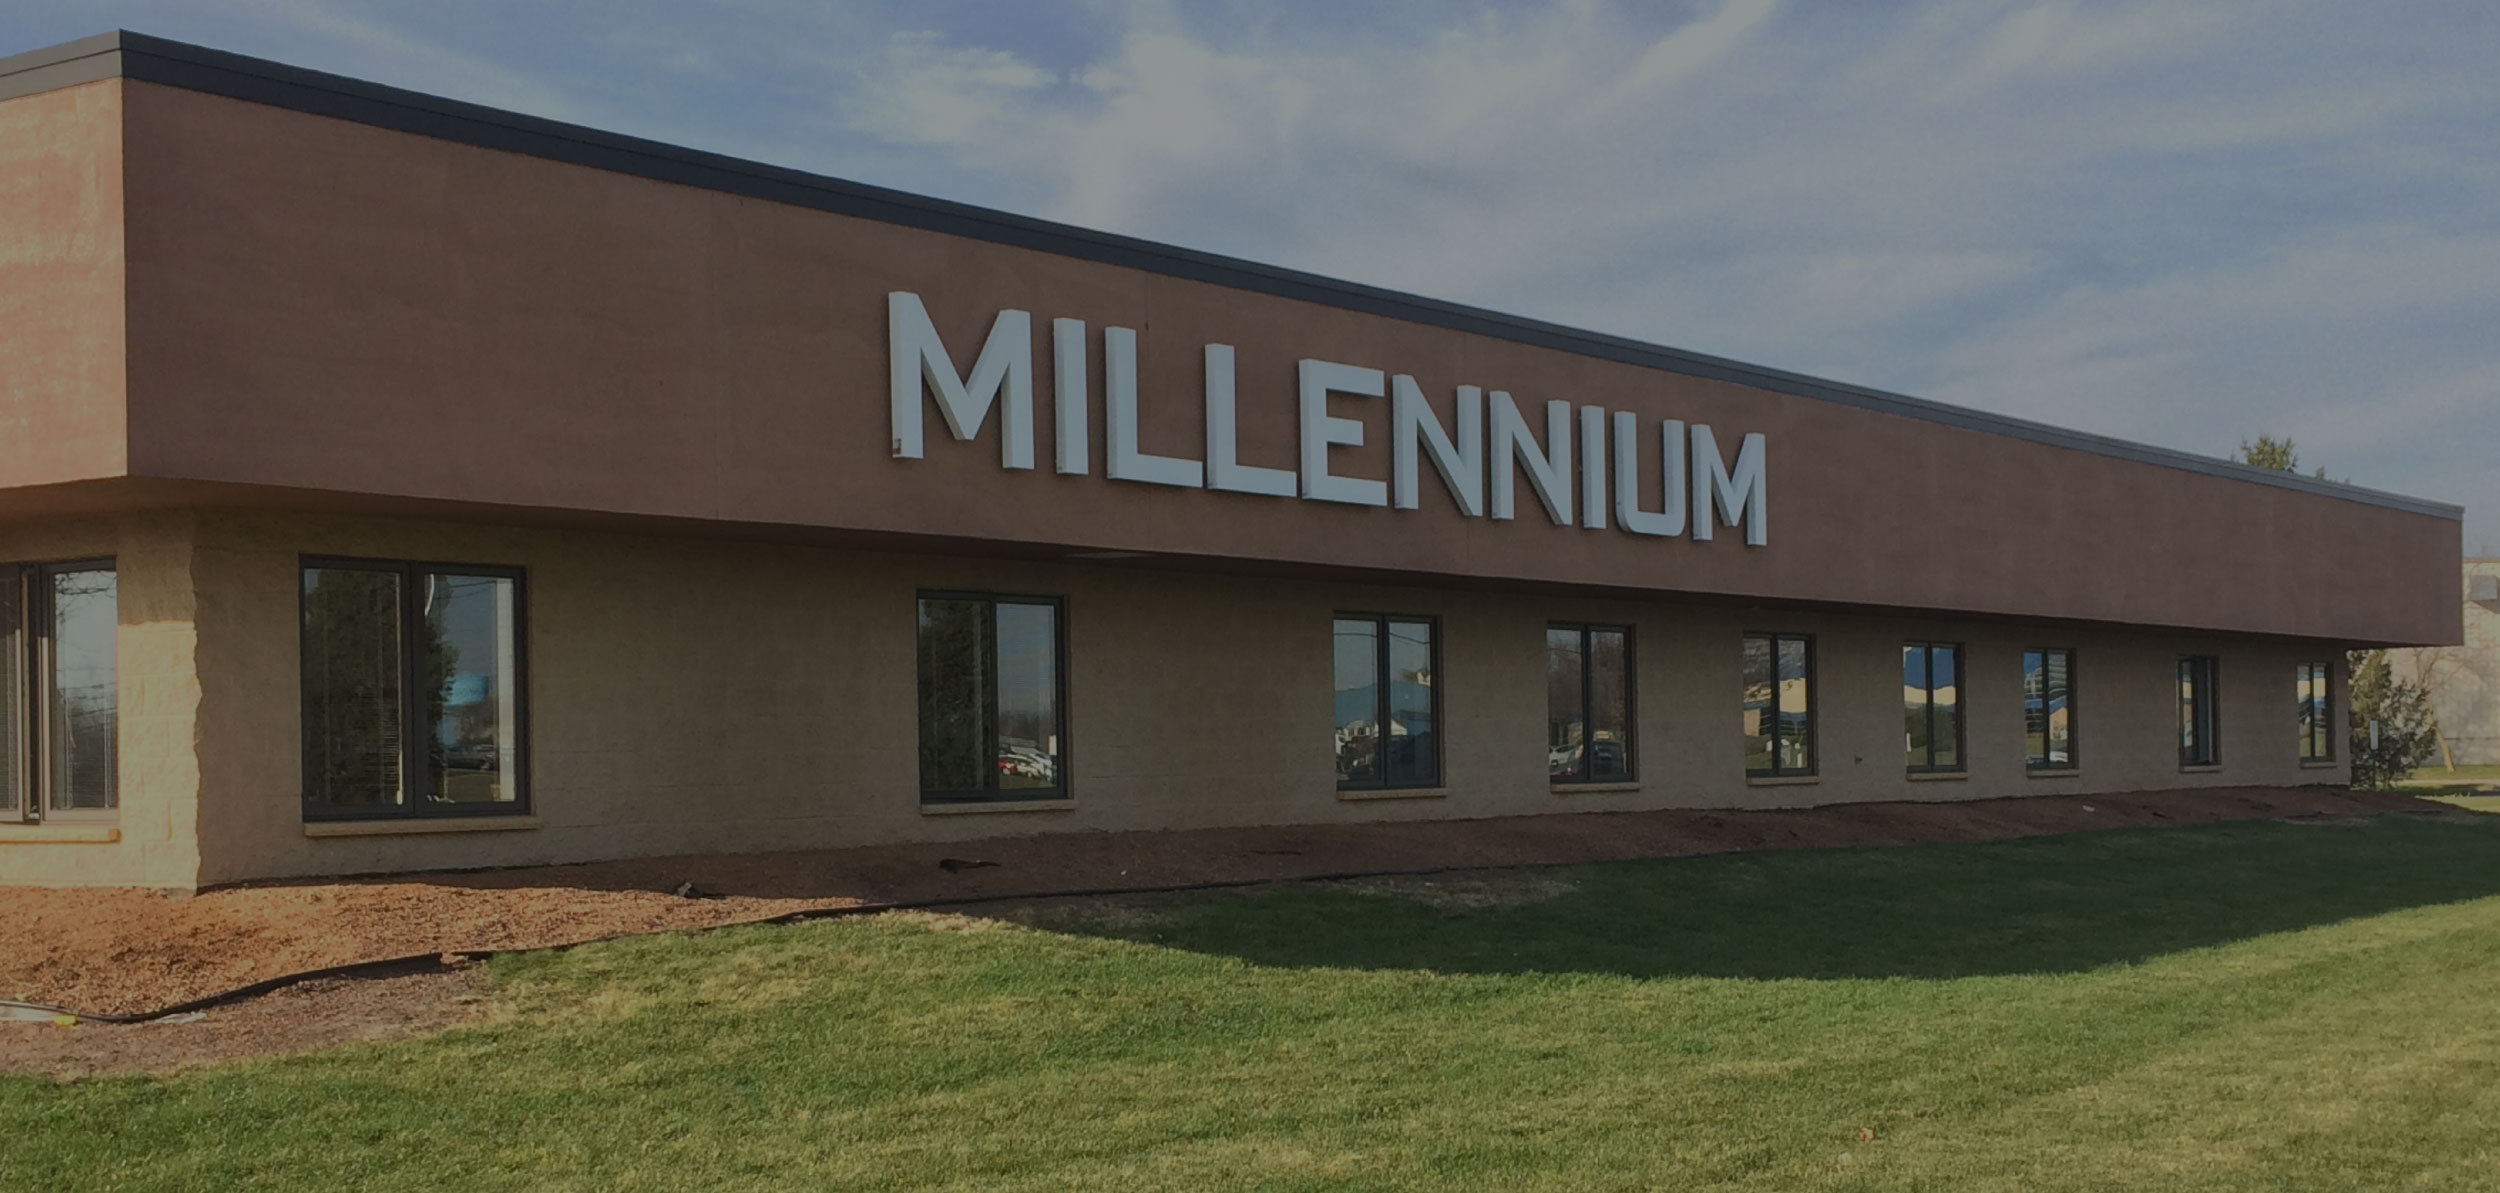 Millennium is among the Top 250 Fastest-Growing Private Companies in the Midwest.